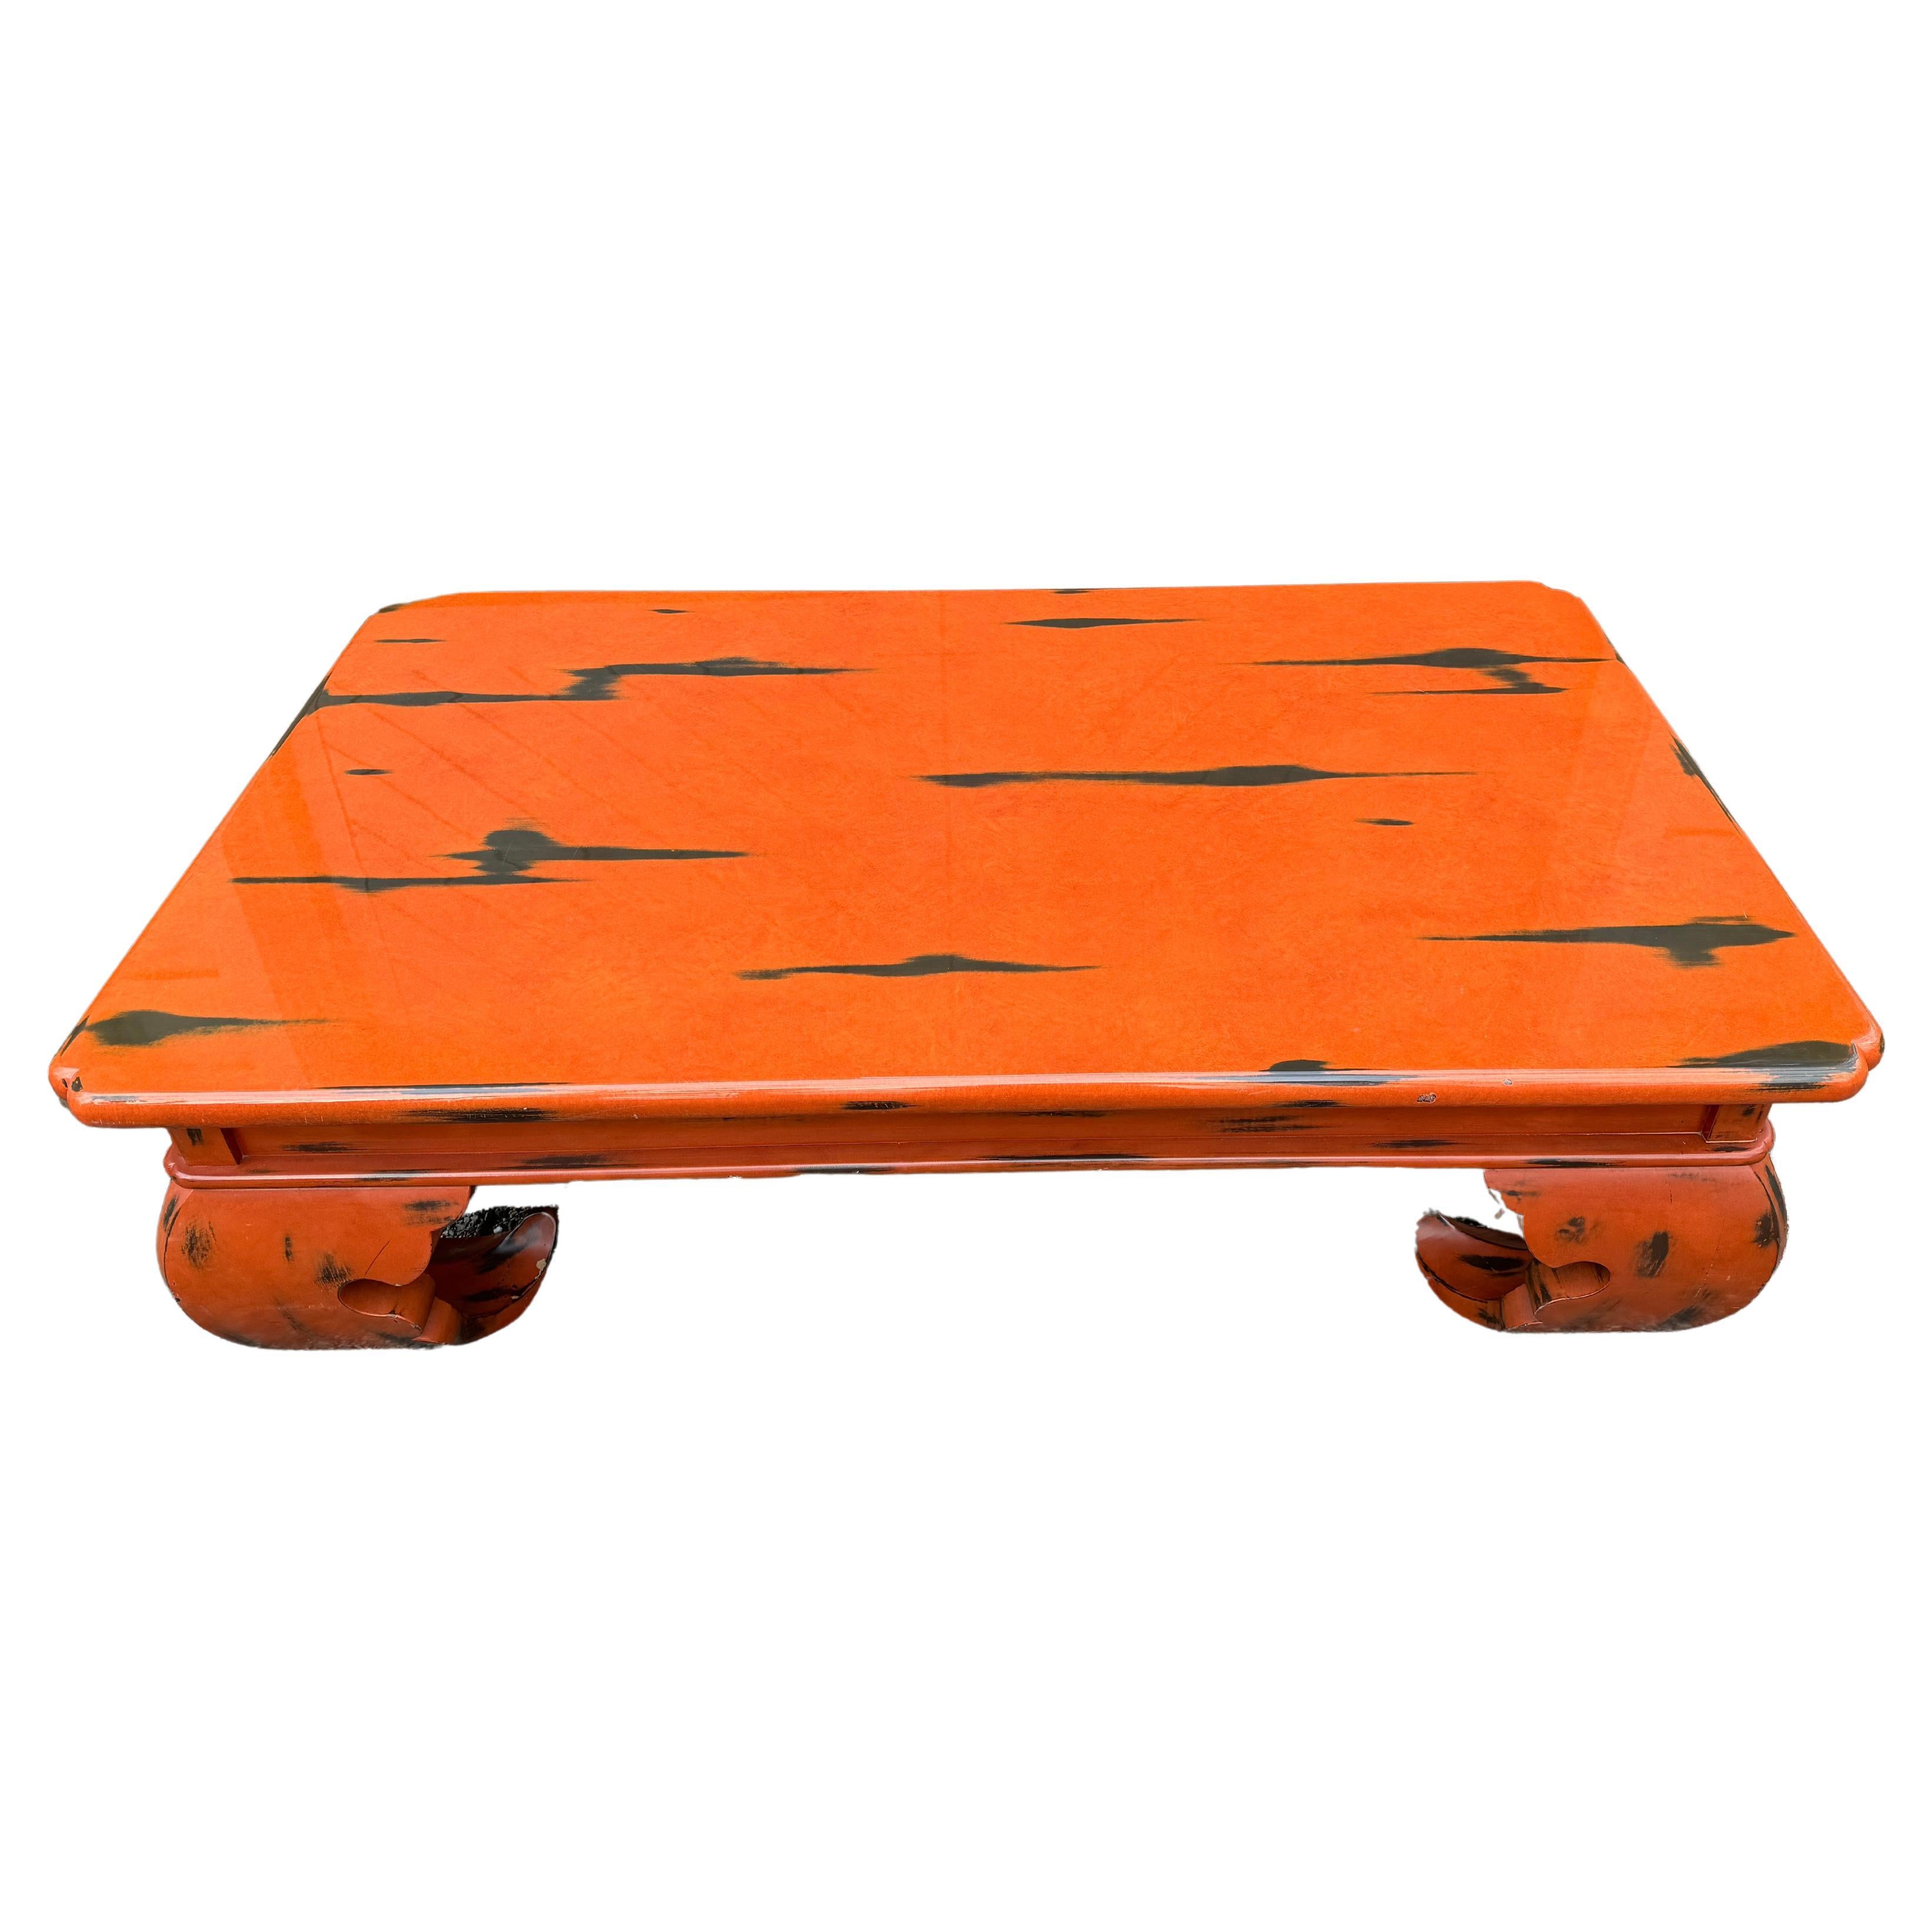 Very Large Karl Springer Style Hermes Orange Painted Coffee Table For Sale